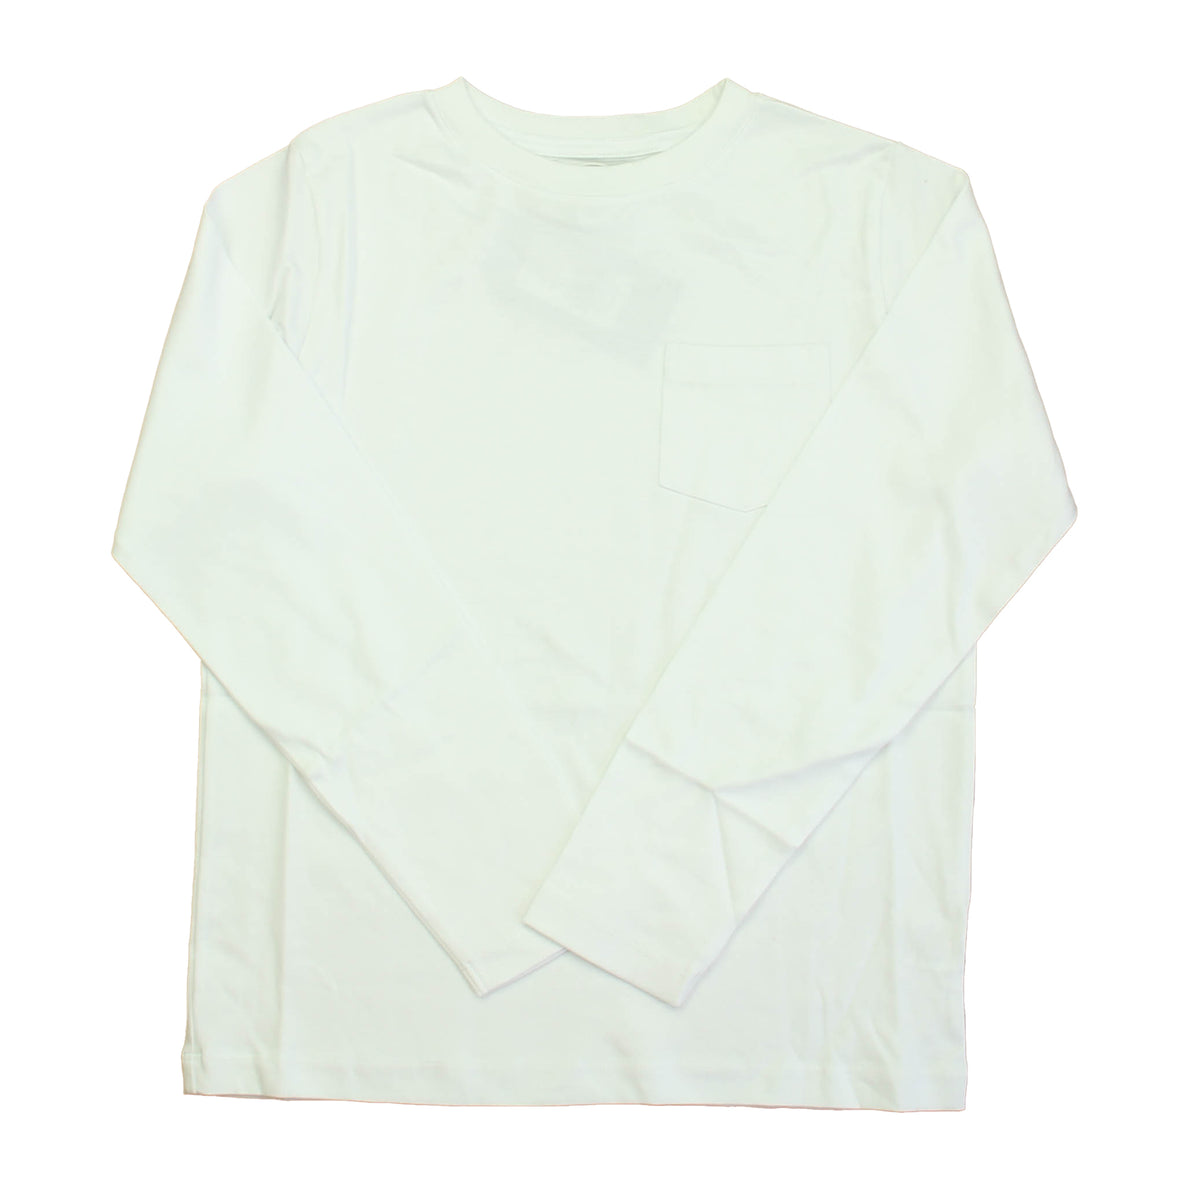 New with Tags: Bright White T-Shirt size: 6-14 Years -- FINAL SALE